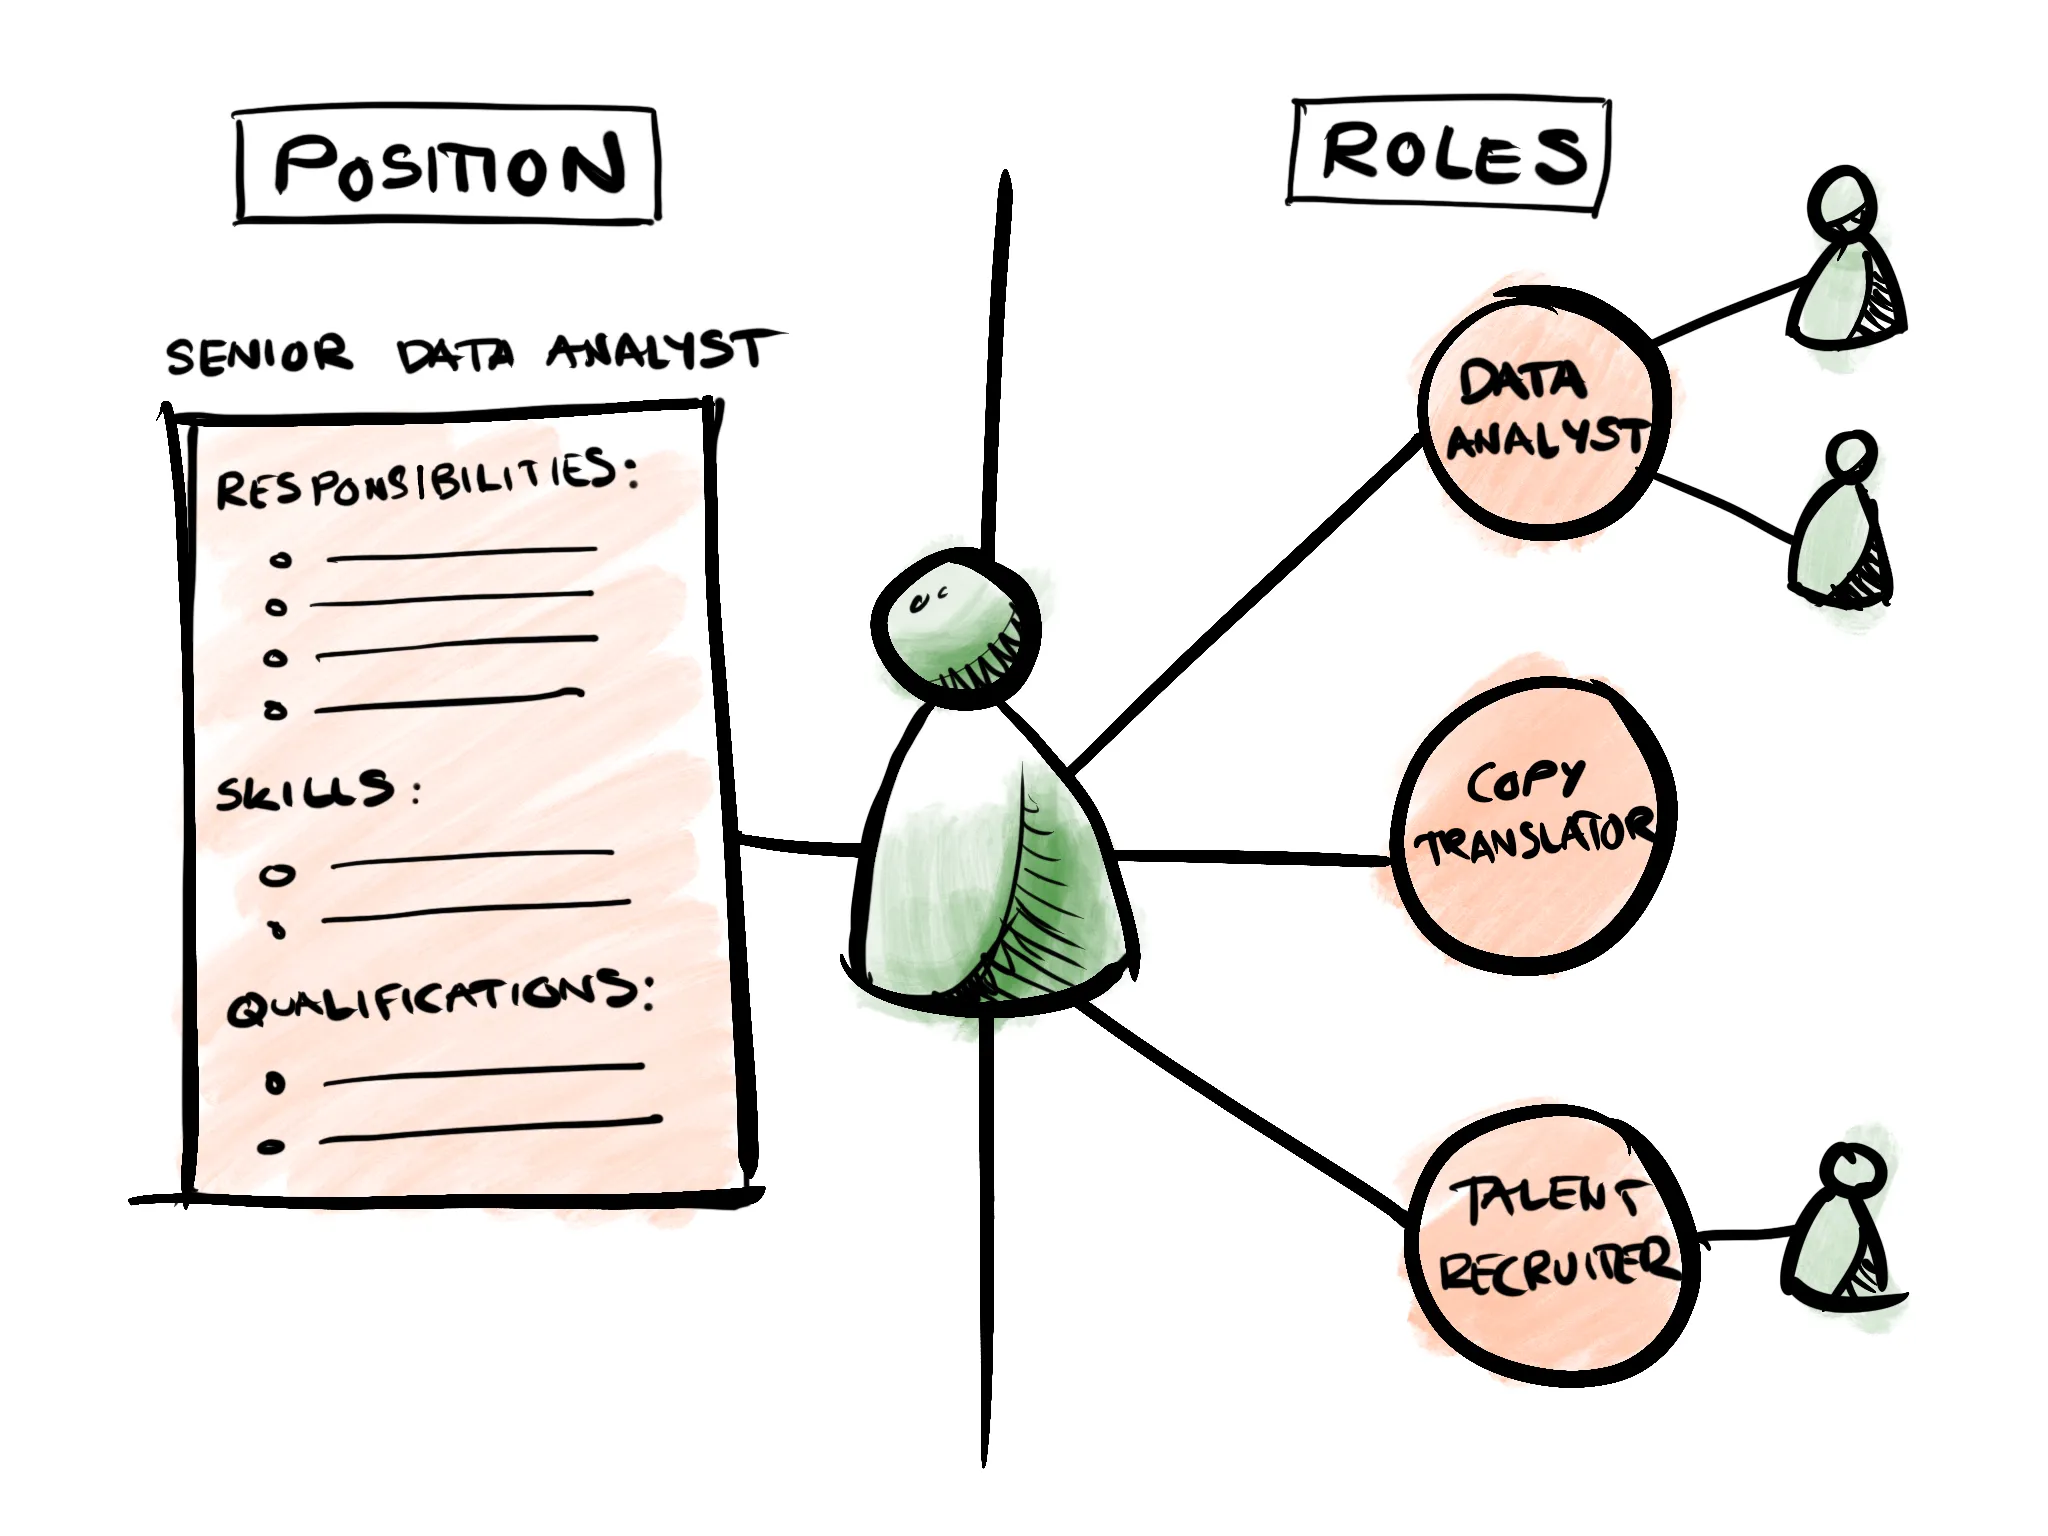 In a position-based organisation, each individual has only one job position (Senior Data Analyst), whereas in a role-based organisation, individuals are represented by their role portfolio (Data Analyst, Copy Translator, Talent Recruiter). Each role can also be held by multiple people.